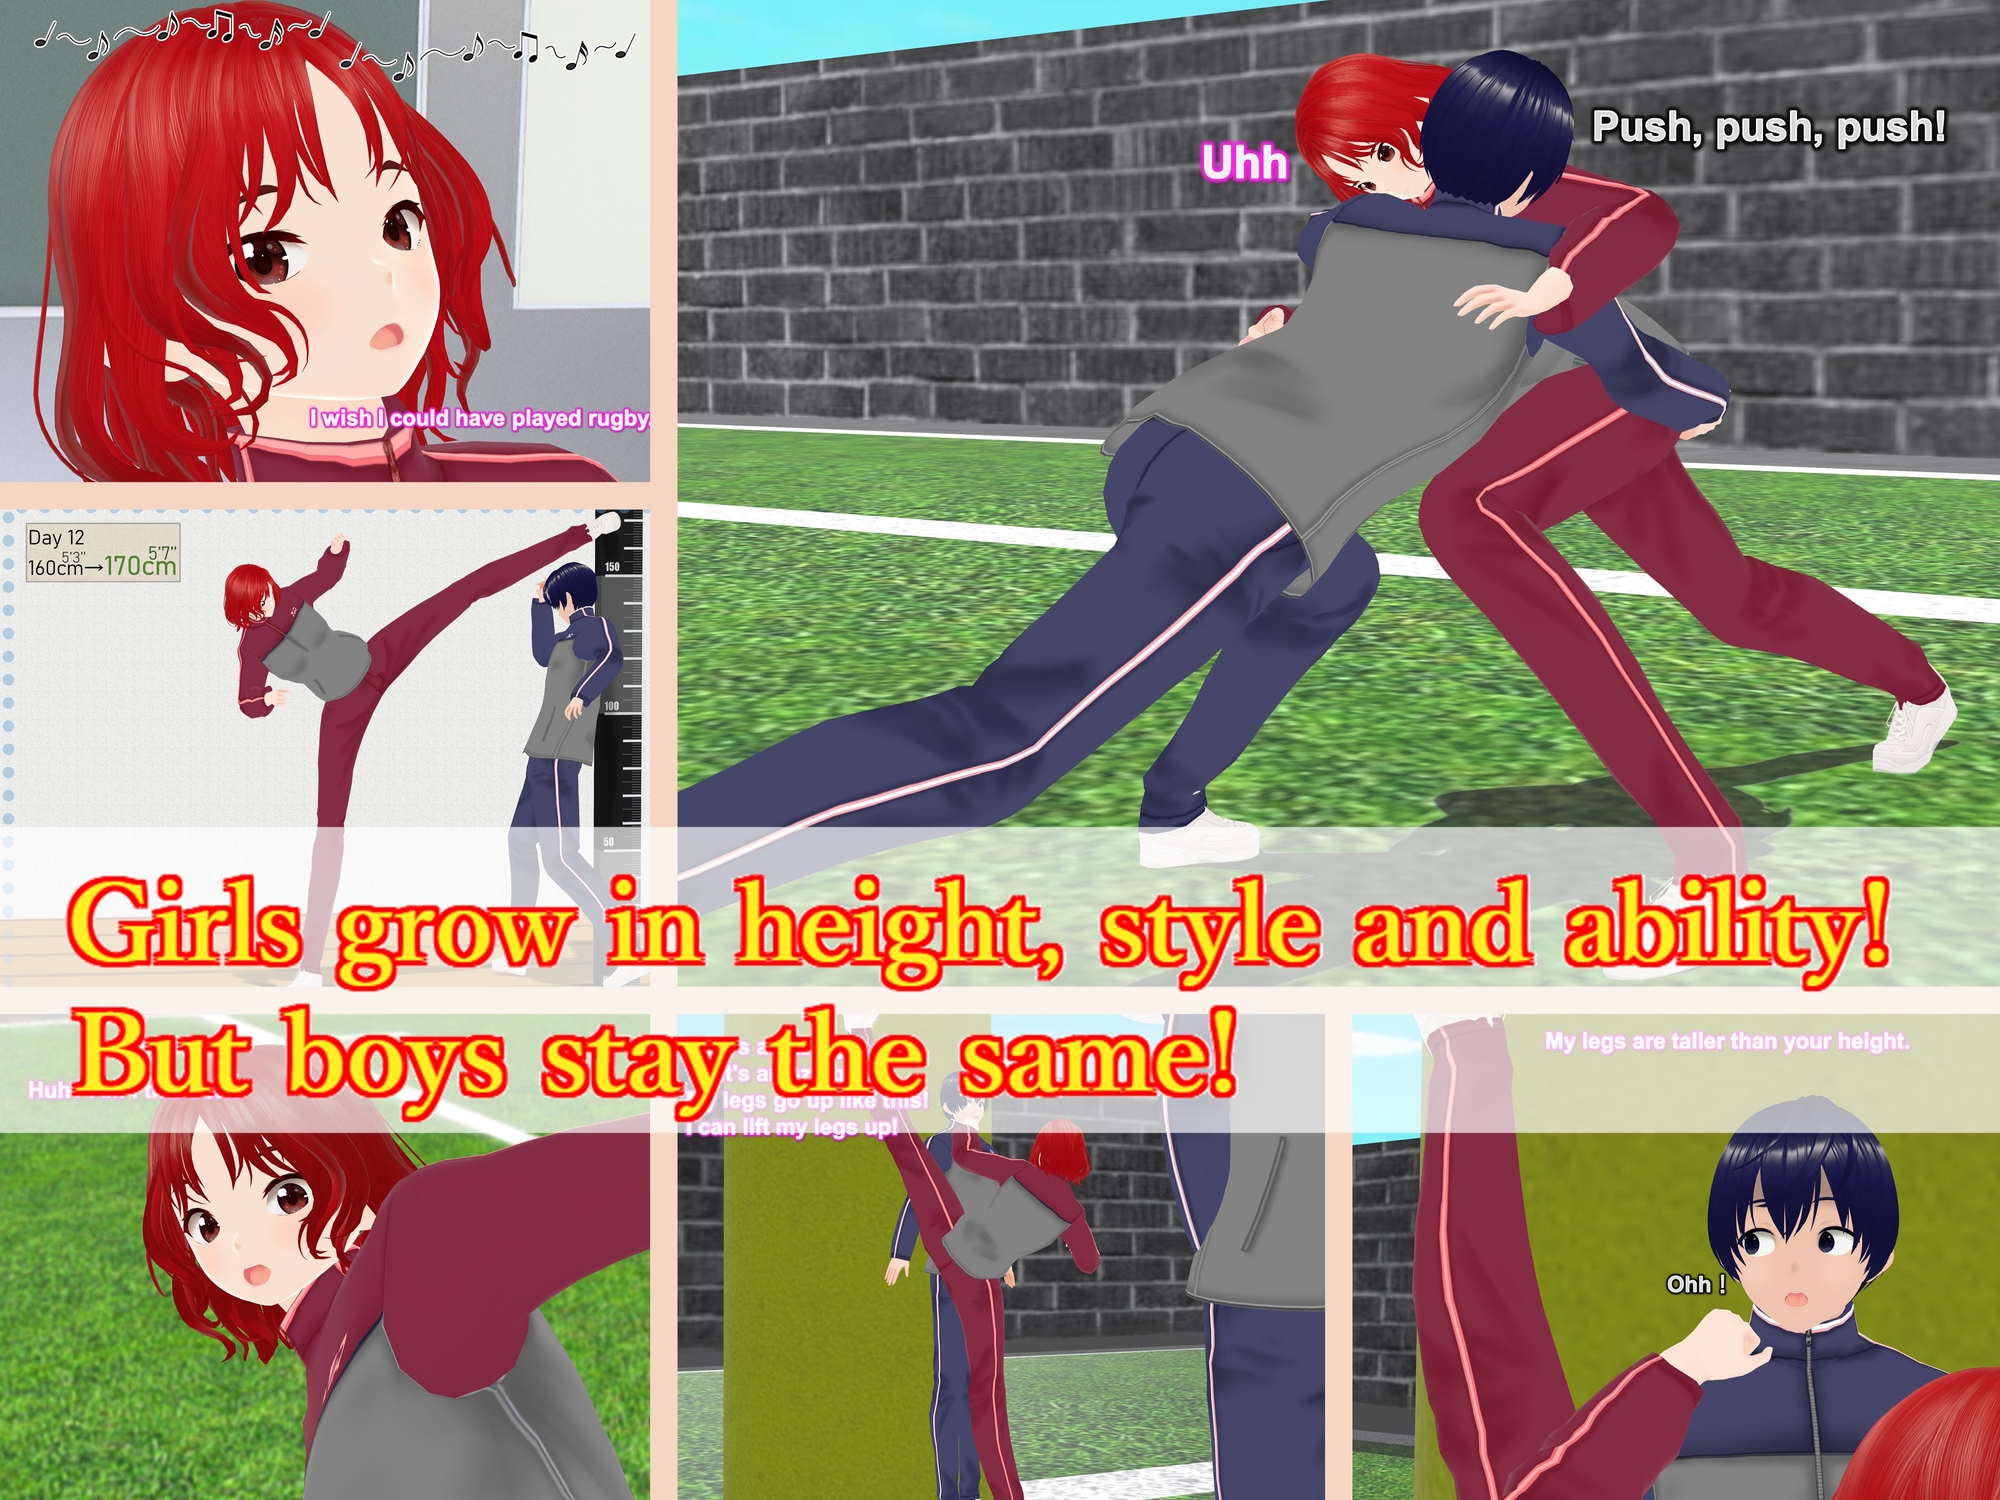 Outgrowing only girls, Overtake boys, Growth sound. Rugby Arc